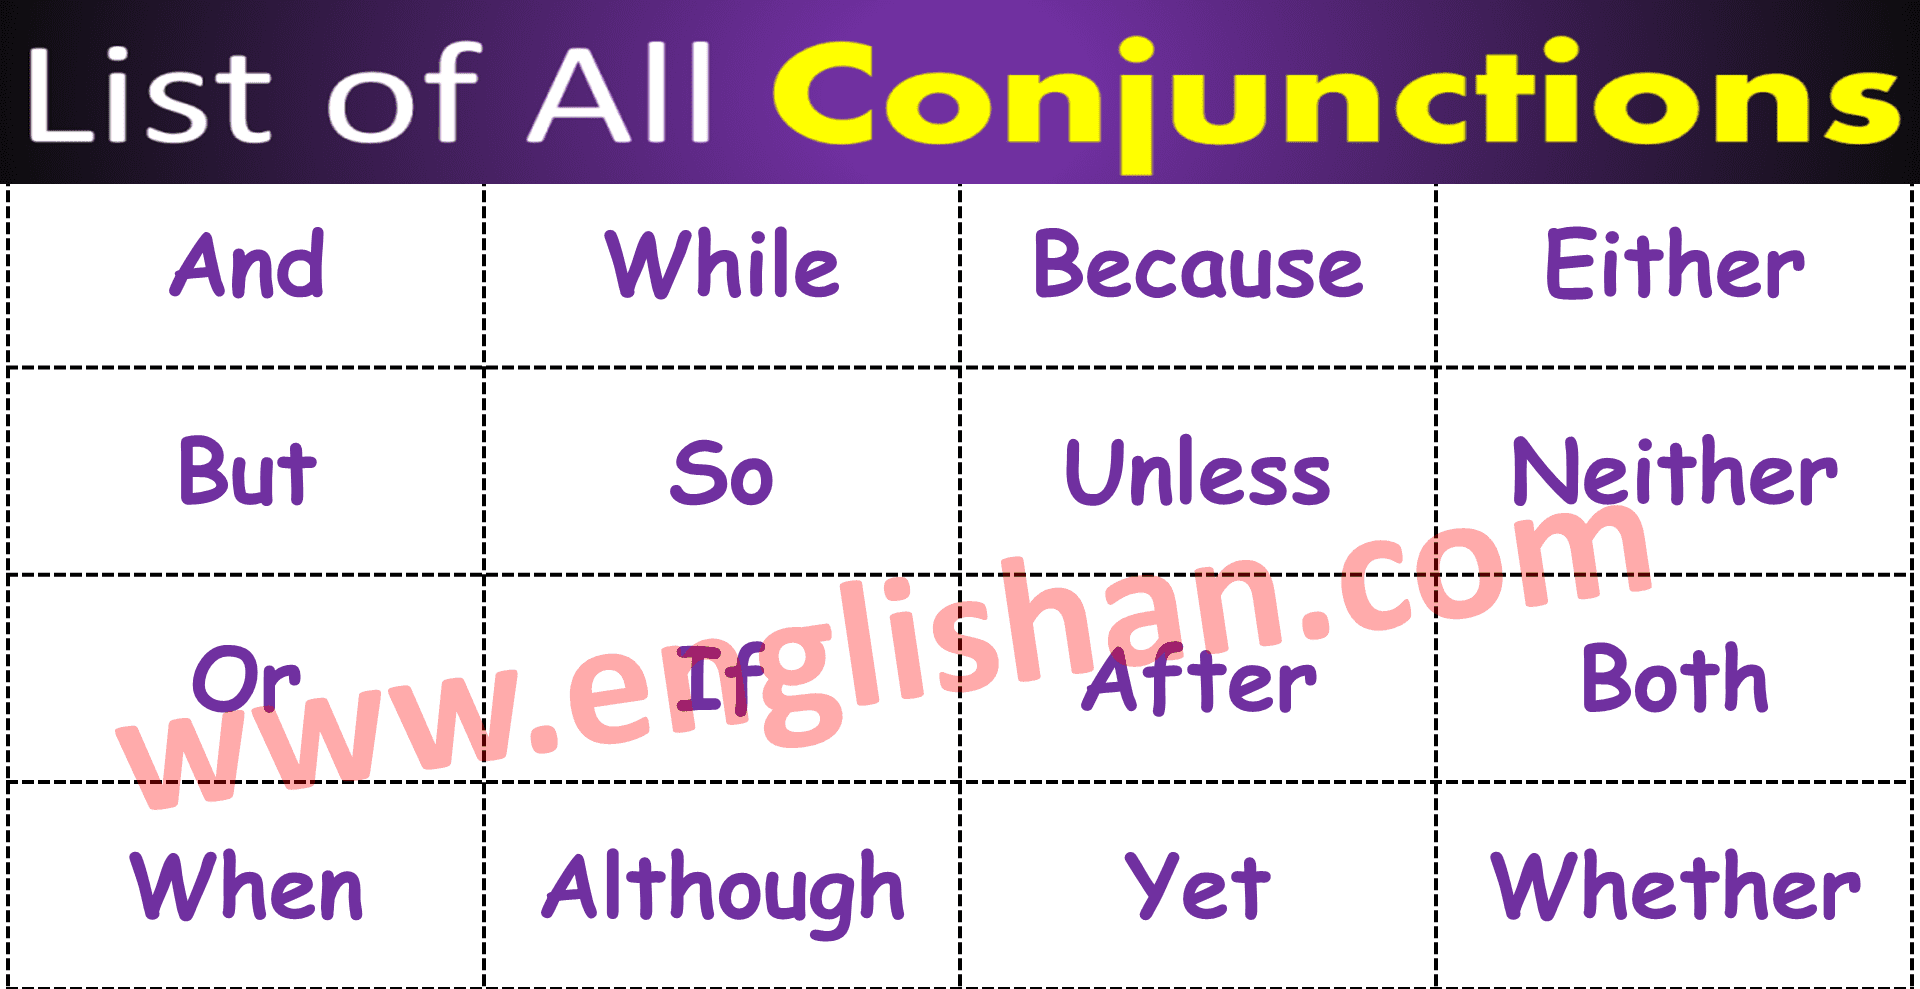 conjunction-definition-and-types-with-examples